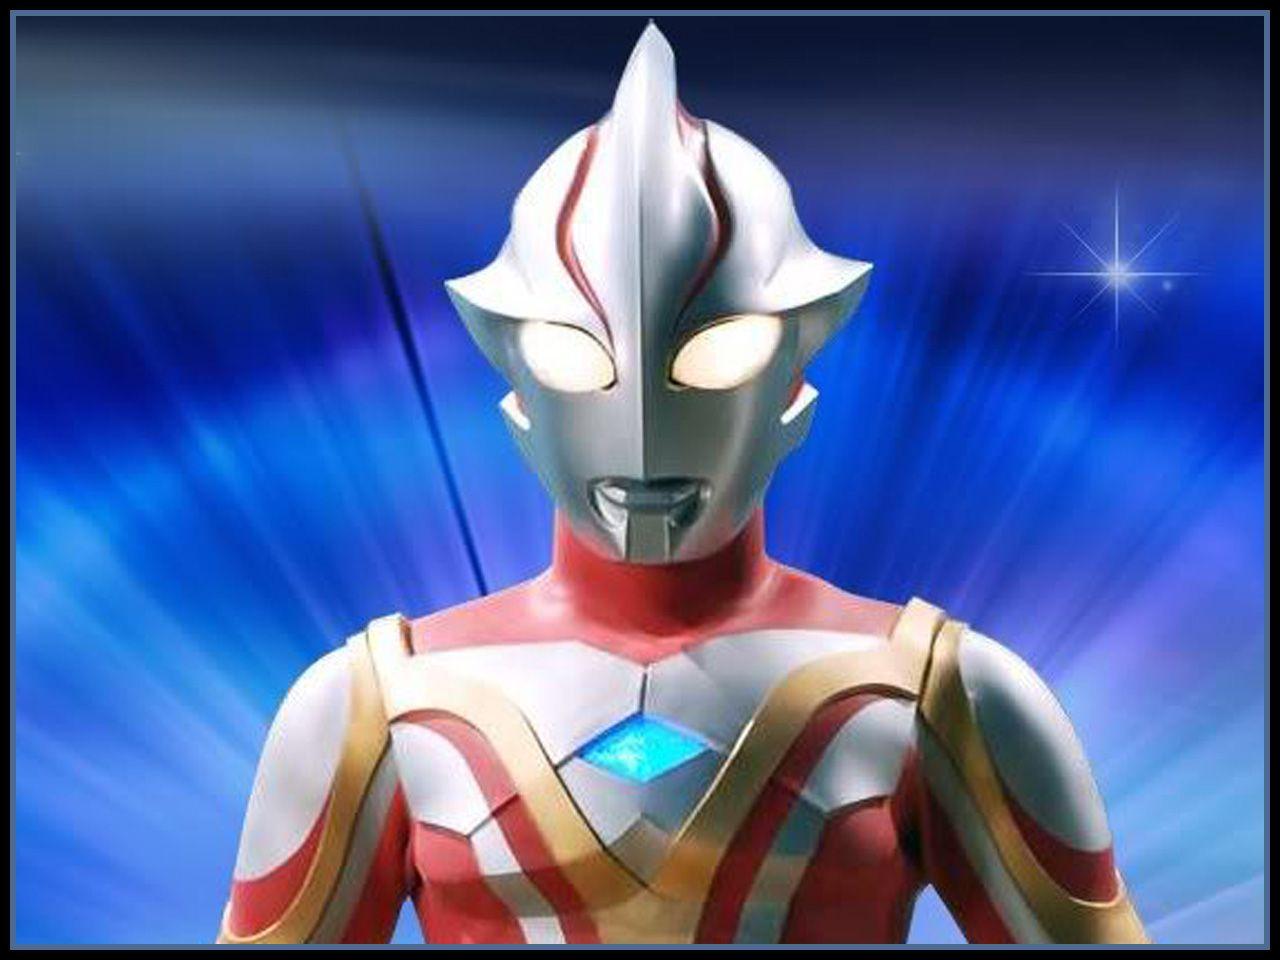 image about Ultraman. A tv, Sci fi and Heroes